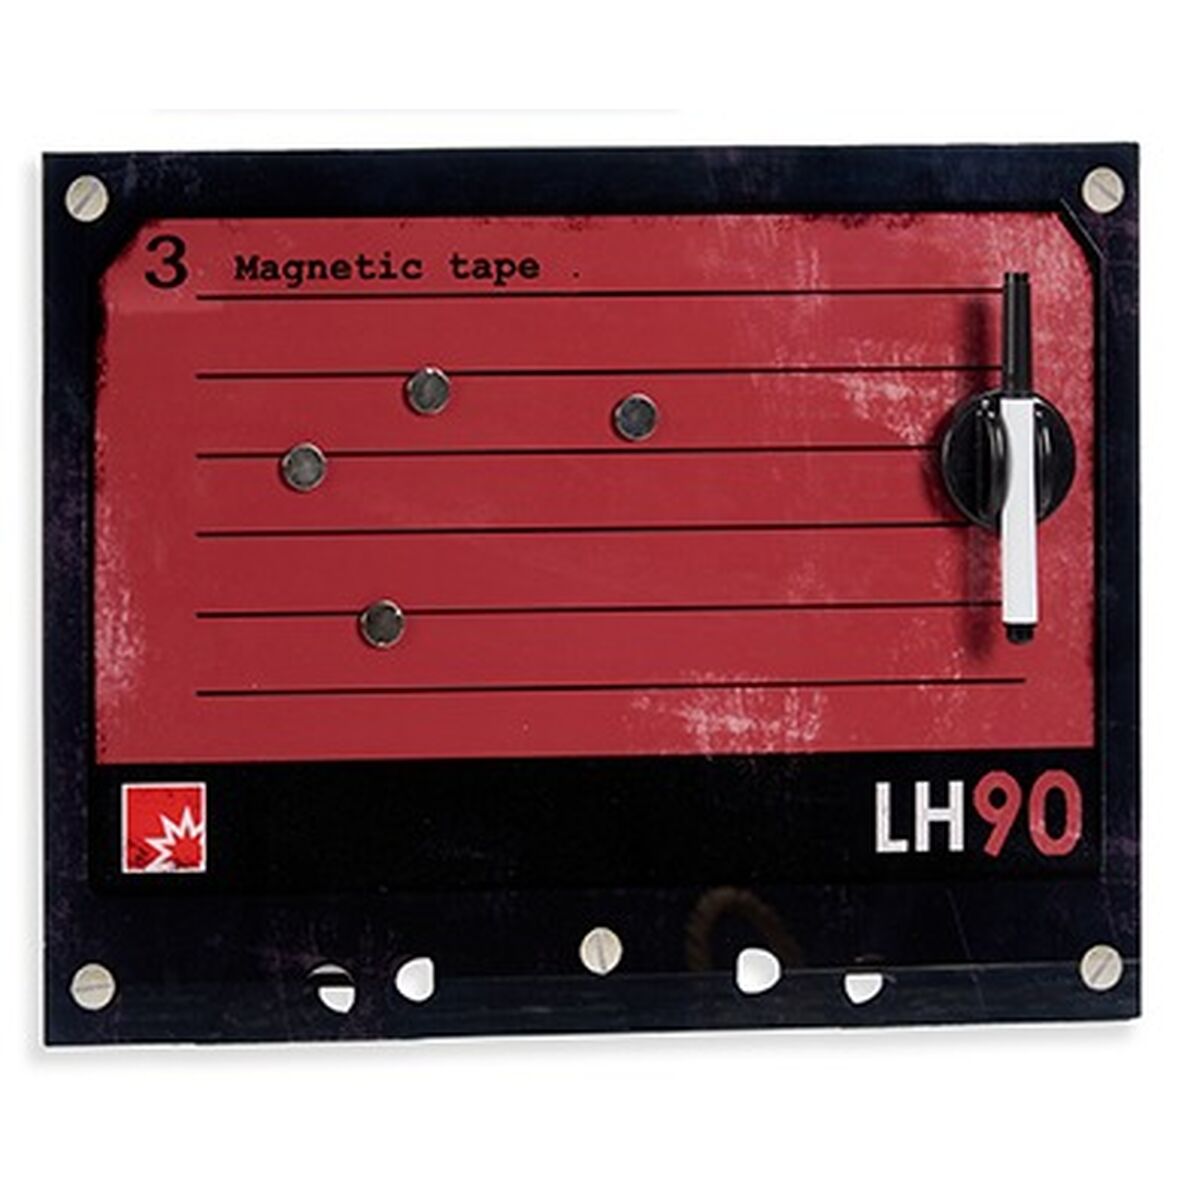 Magnetic Board with Marker 40 x 30 cm (4 Units)